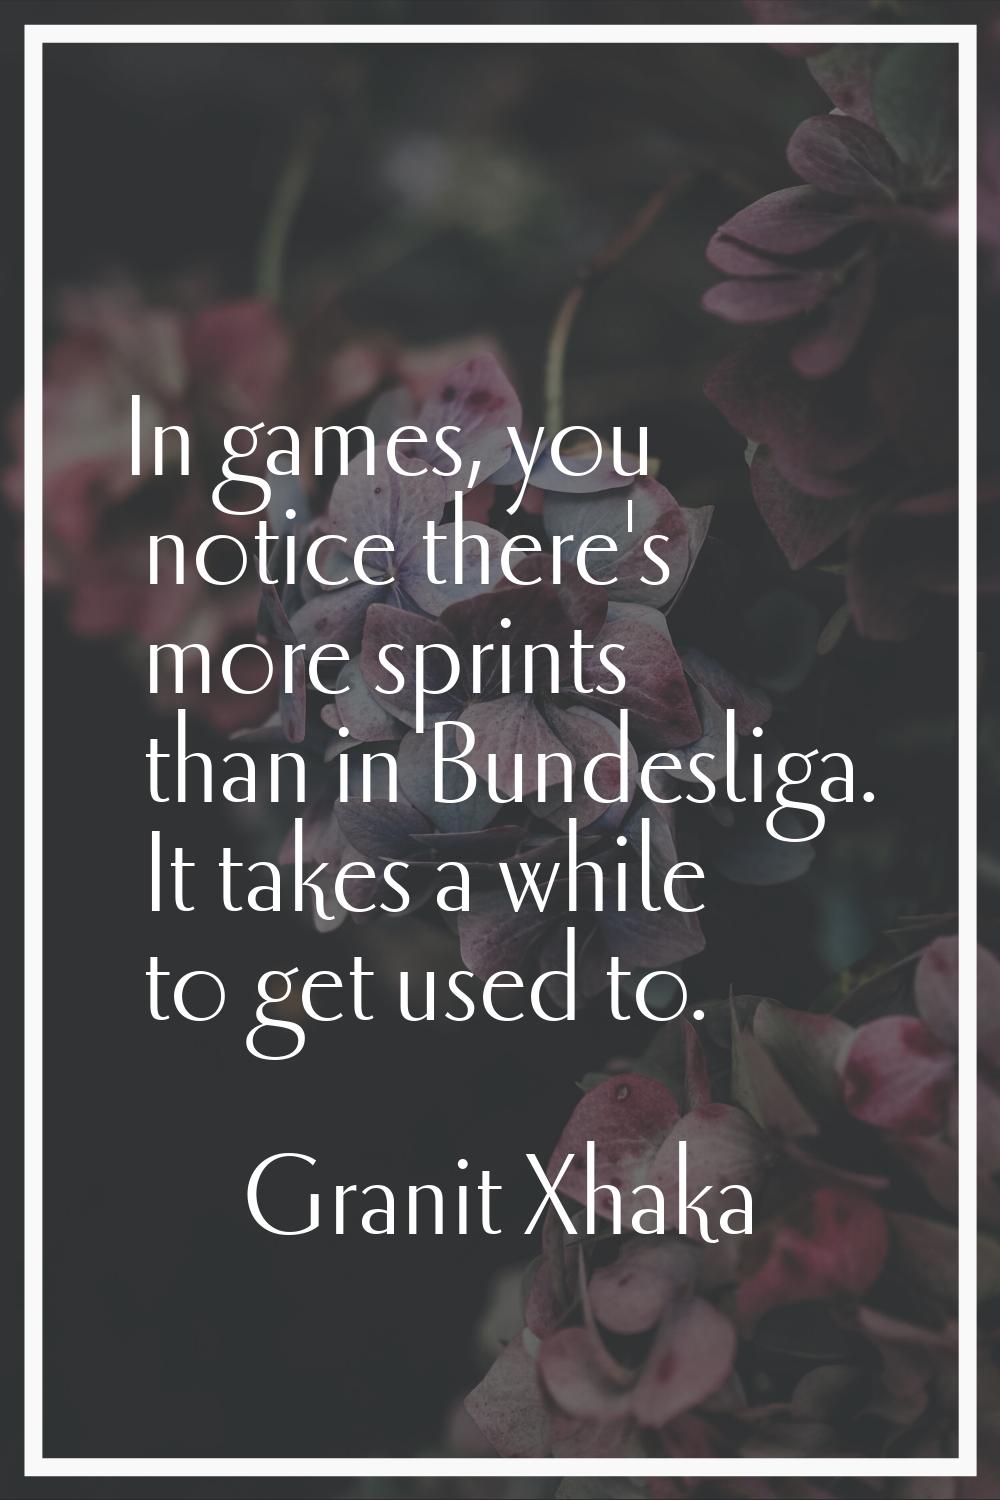 In games, you notice there's more sprints than in Bundesliga. It takes a while to get used to.